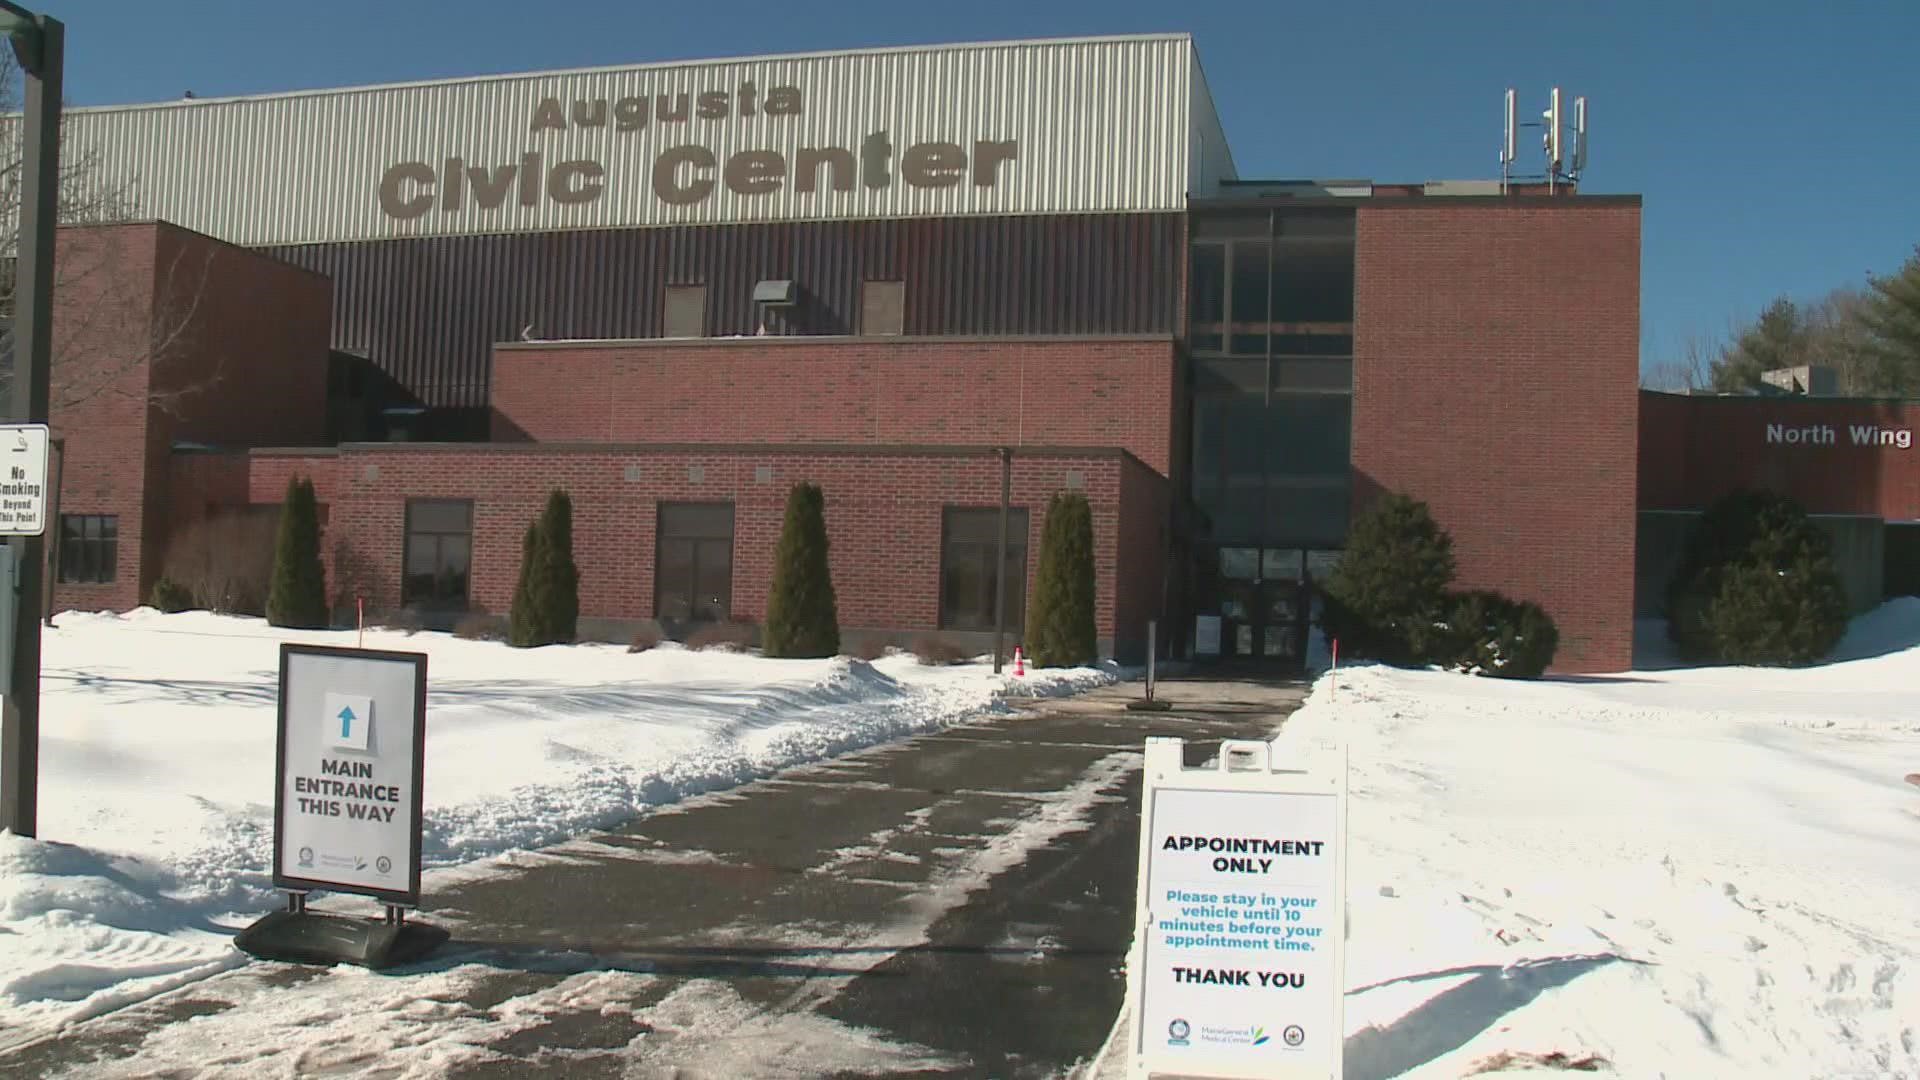 From trade shows to concerts to basketball, the civic center continues to bring people to Augusta.